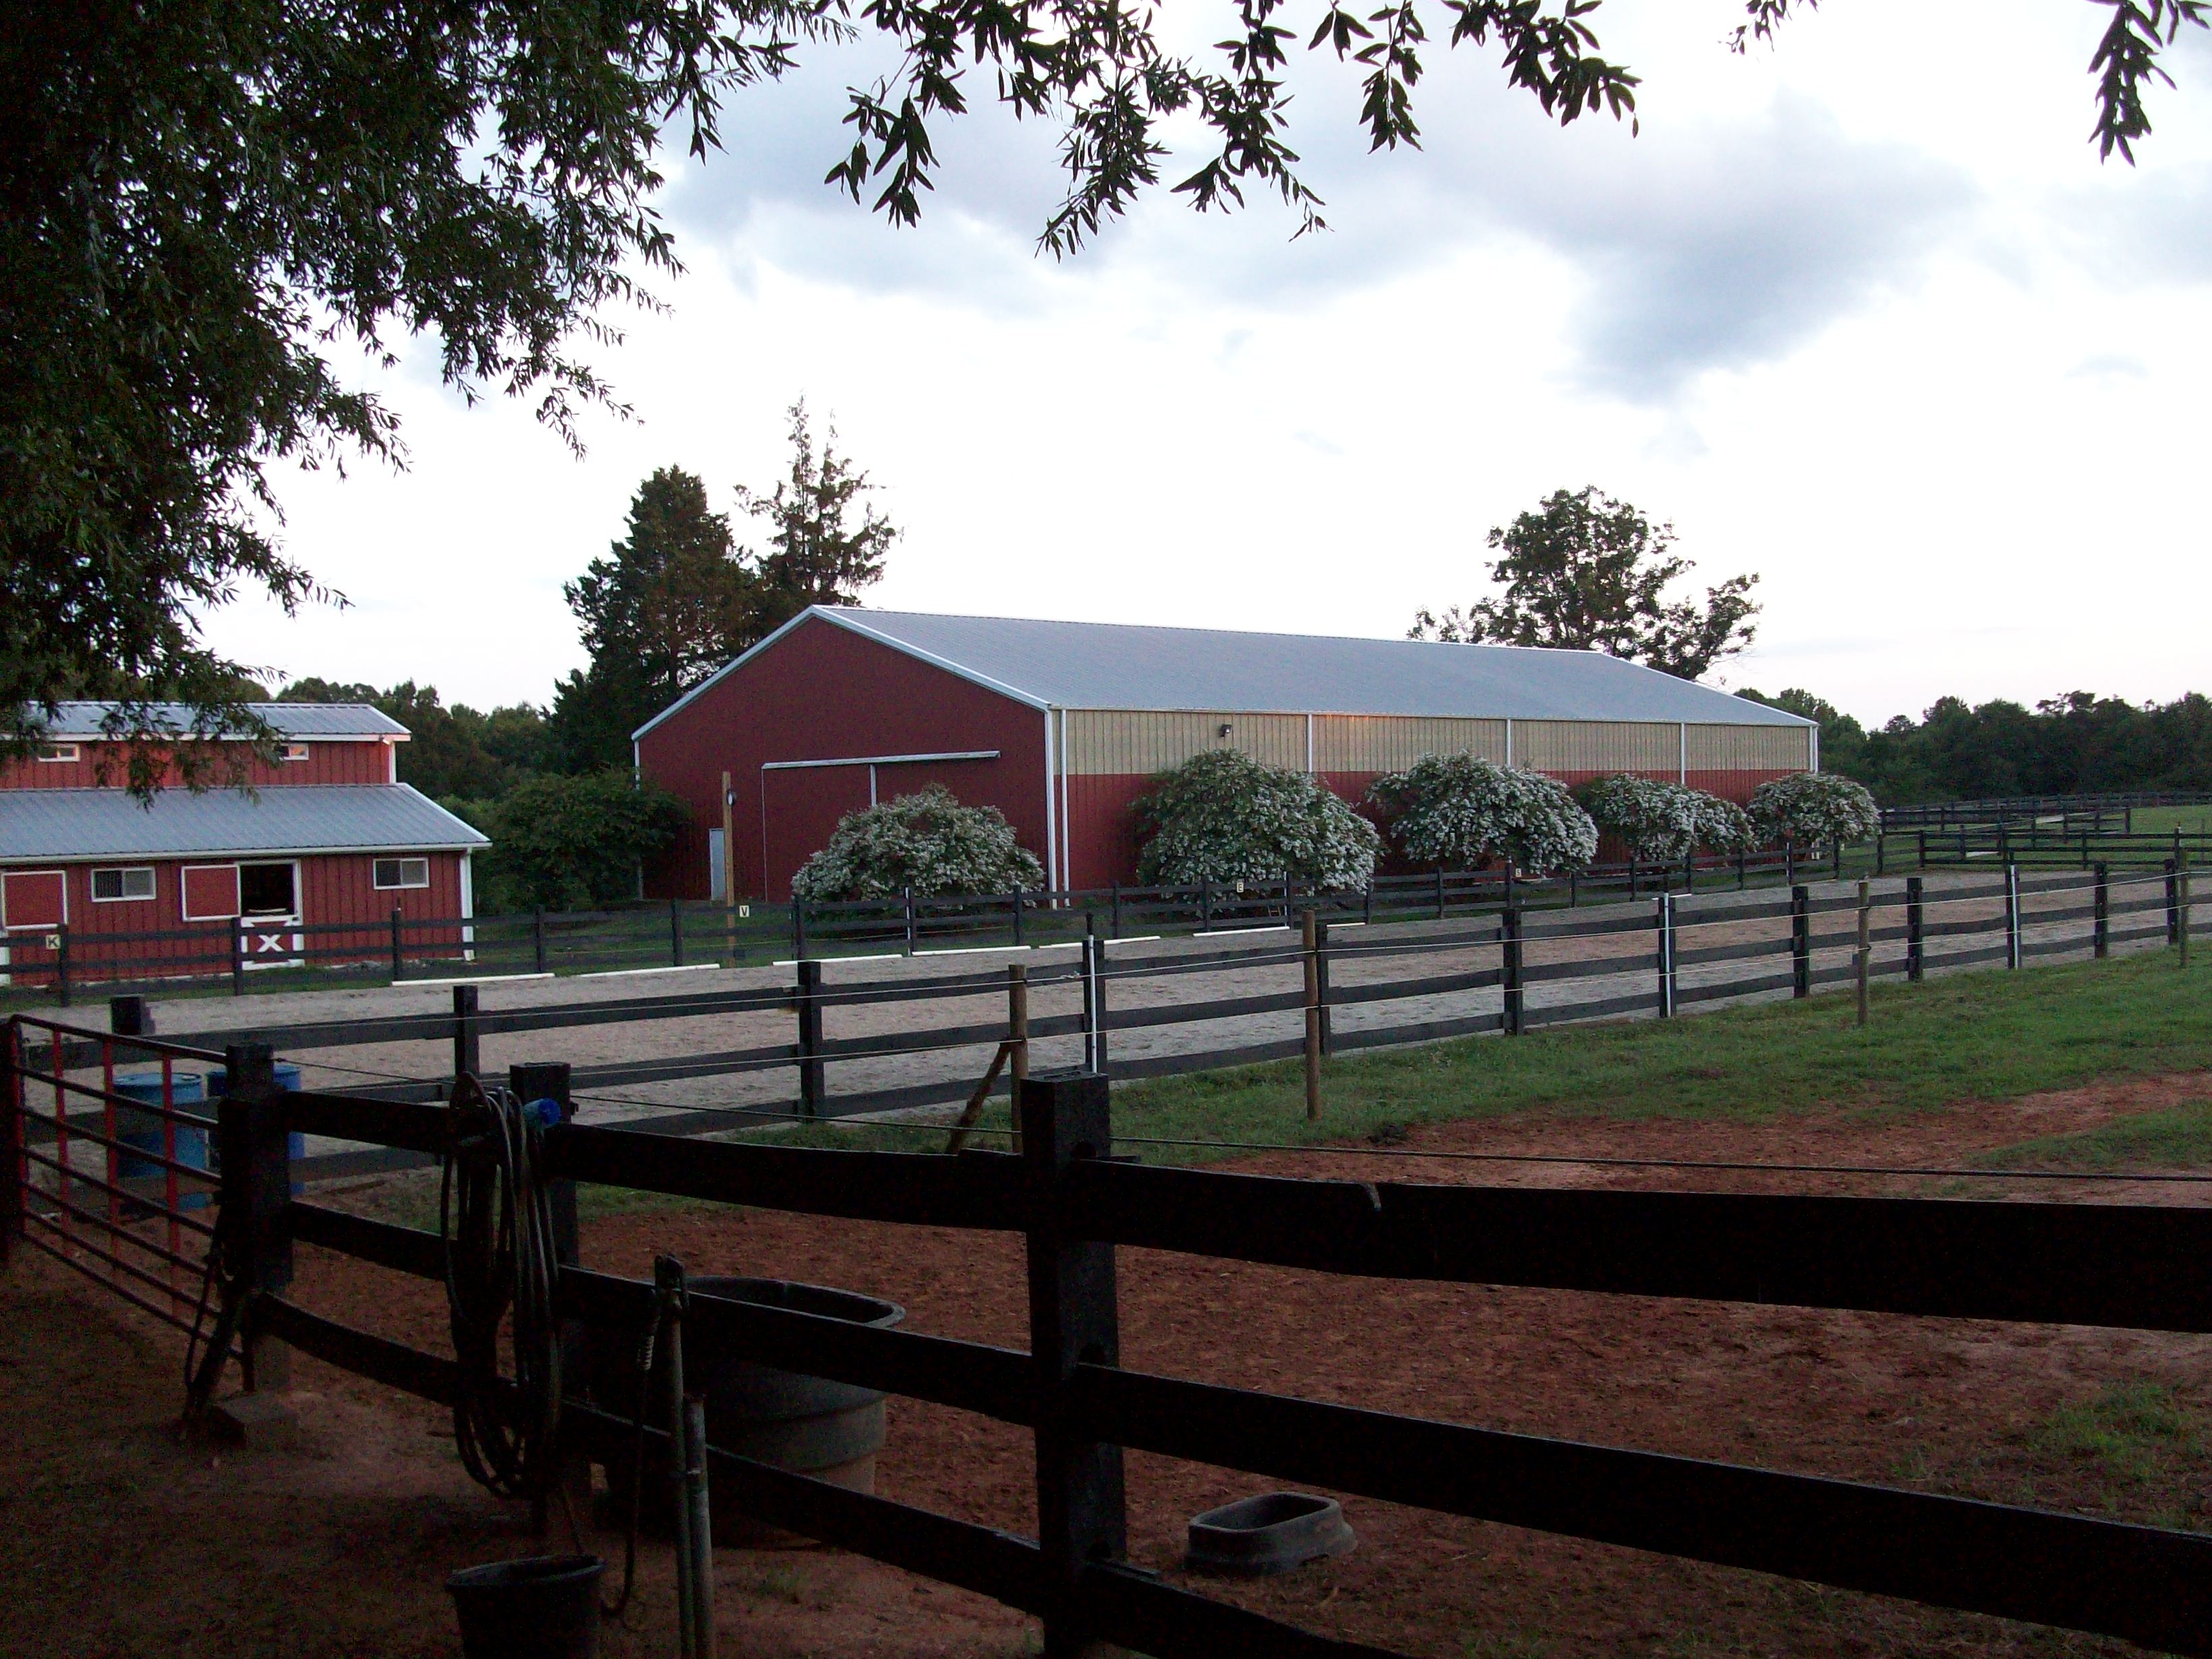 View of barn and indoor/outdoor riding arenas